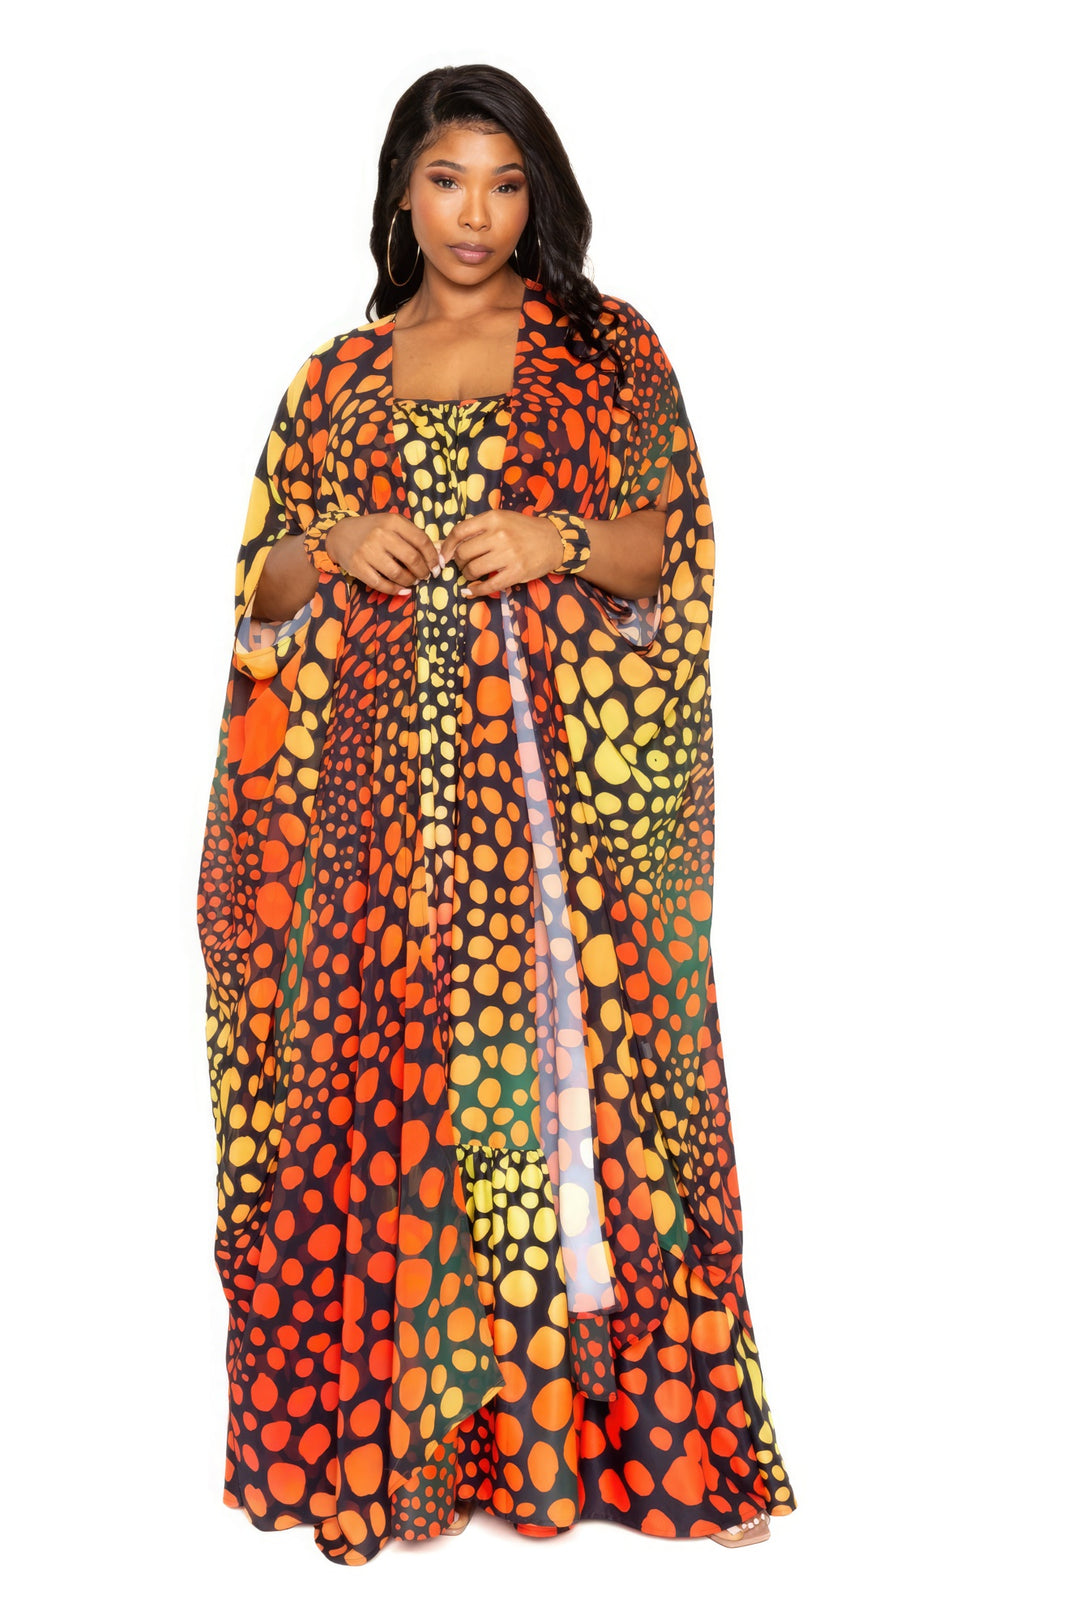 Dot Robe With Wrist Band in orange and black